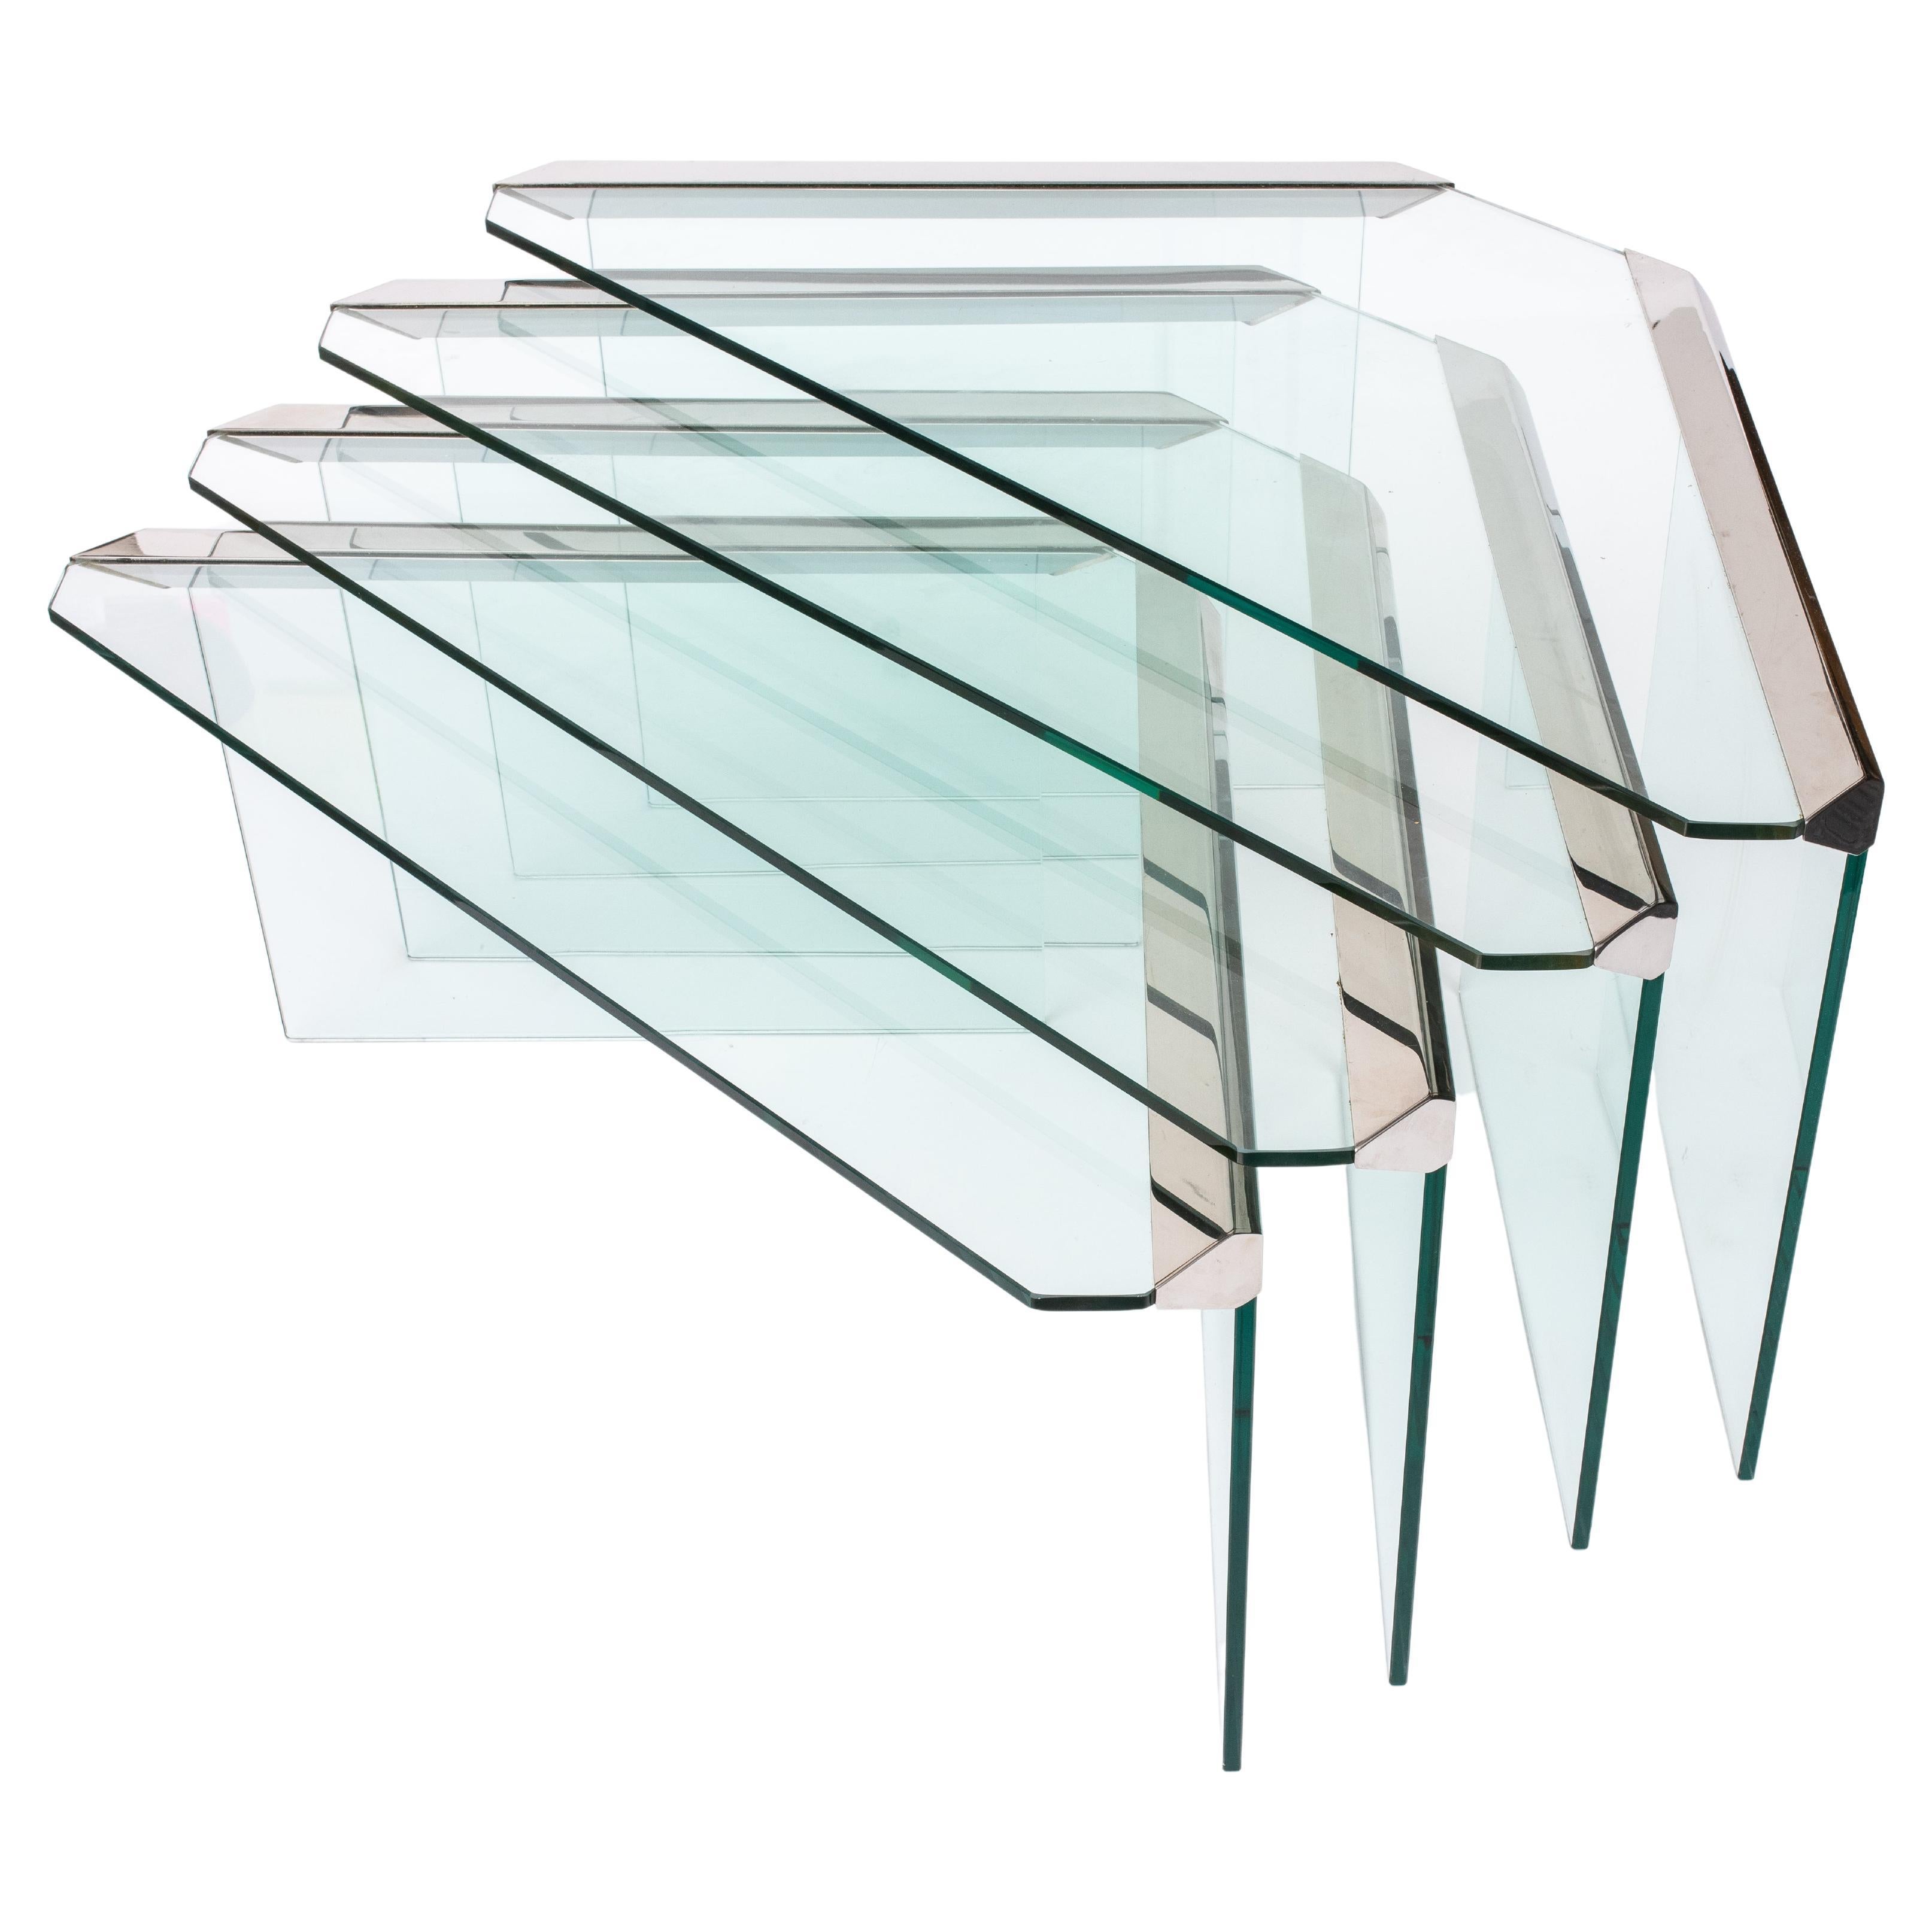 Pierangelo Galotti for Galotti & Radice Italian Modern set of four nesting tables in chrome and glass, produced in the early 1980s. Tallest:

Measurements: 15